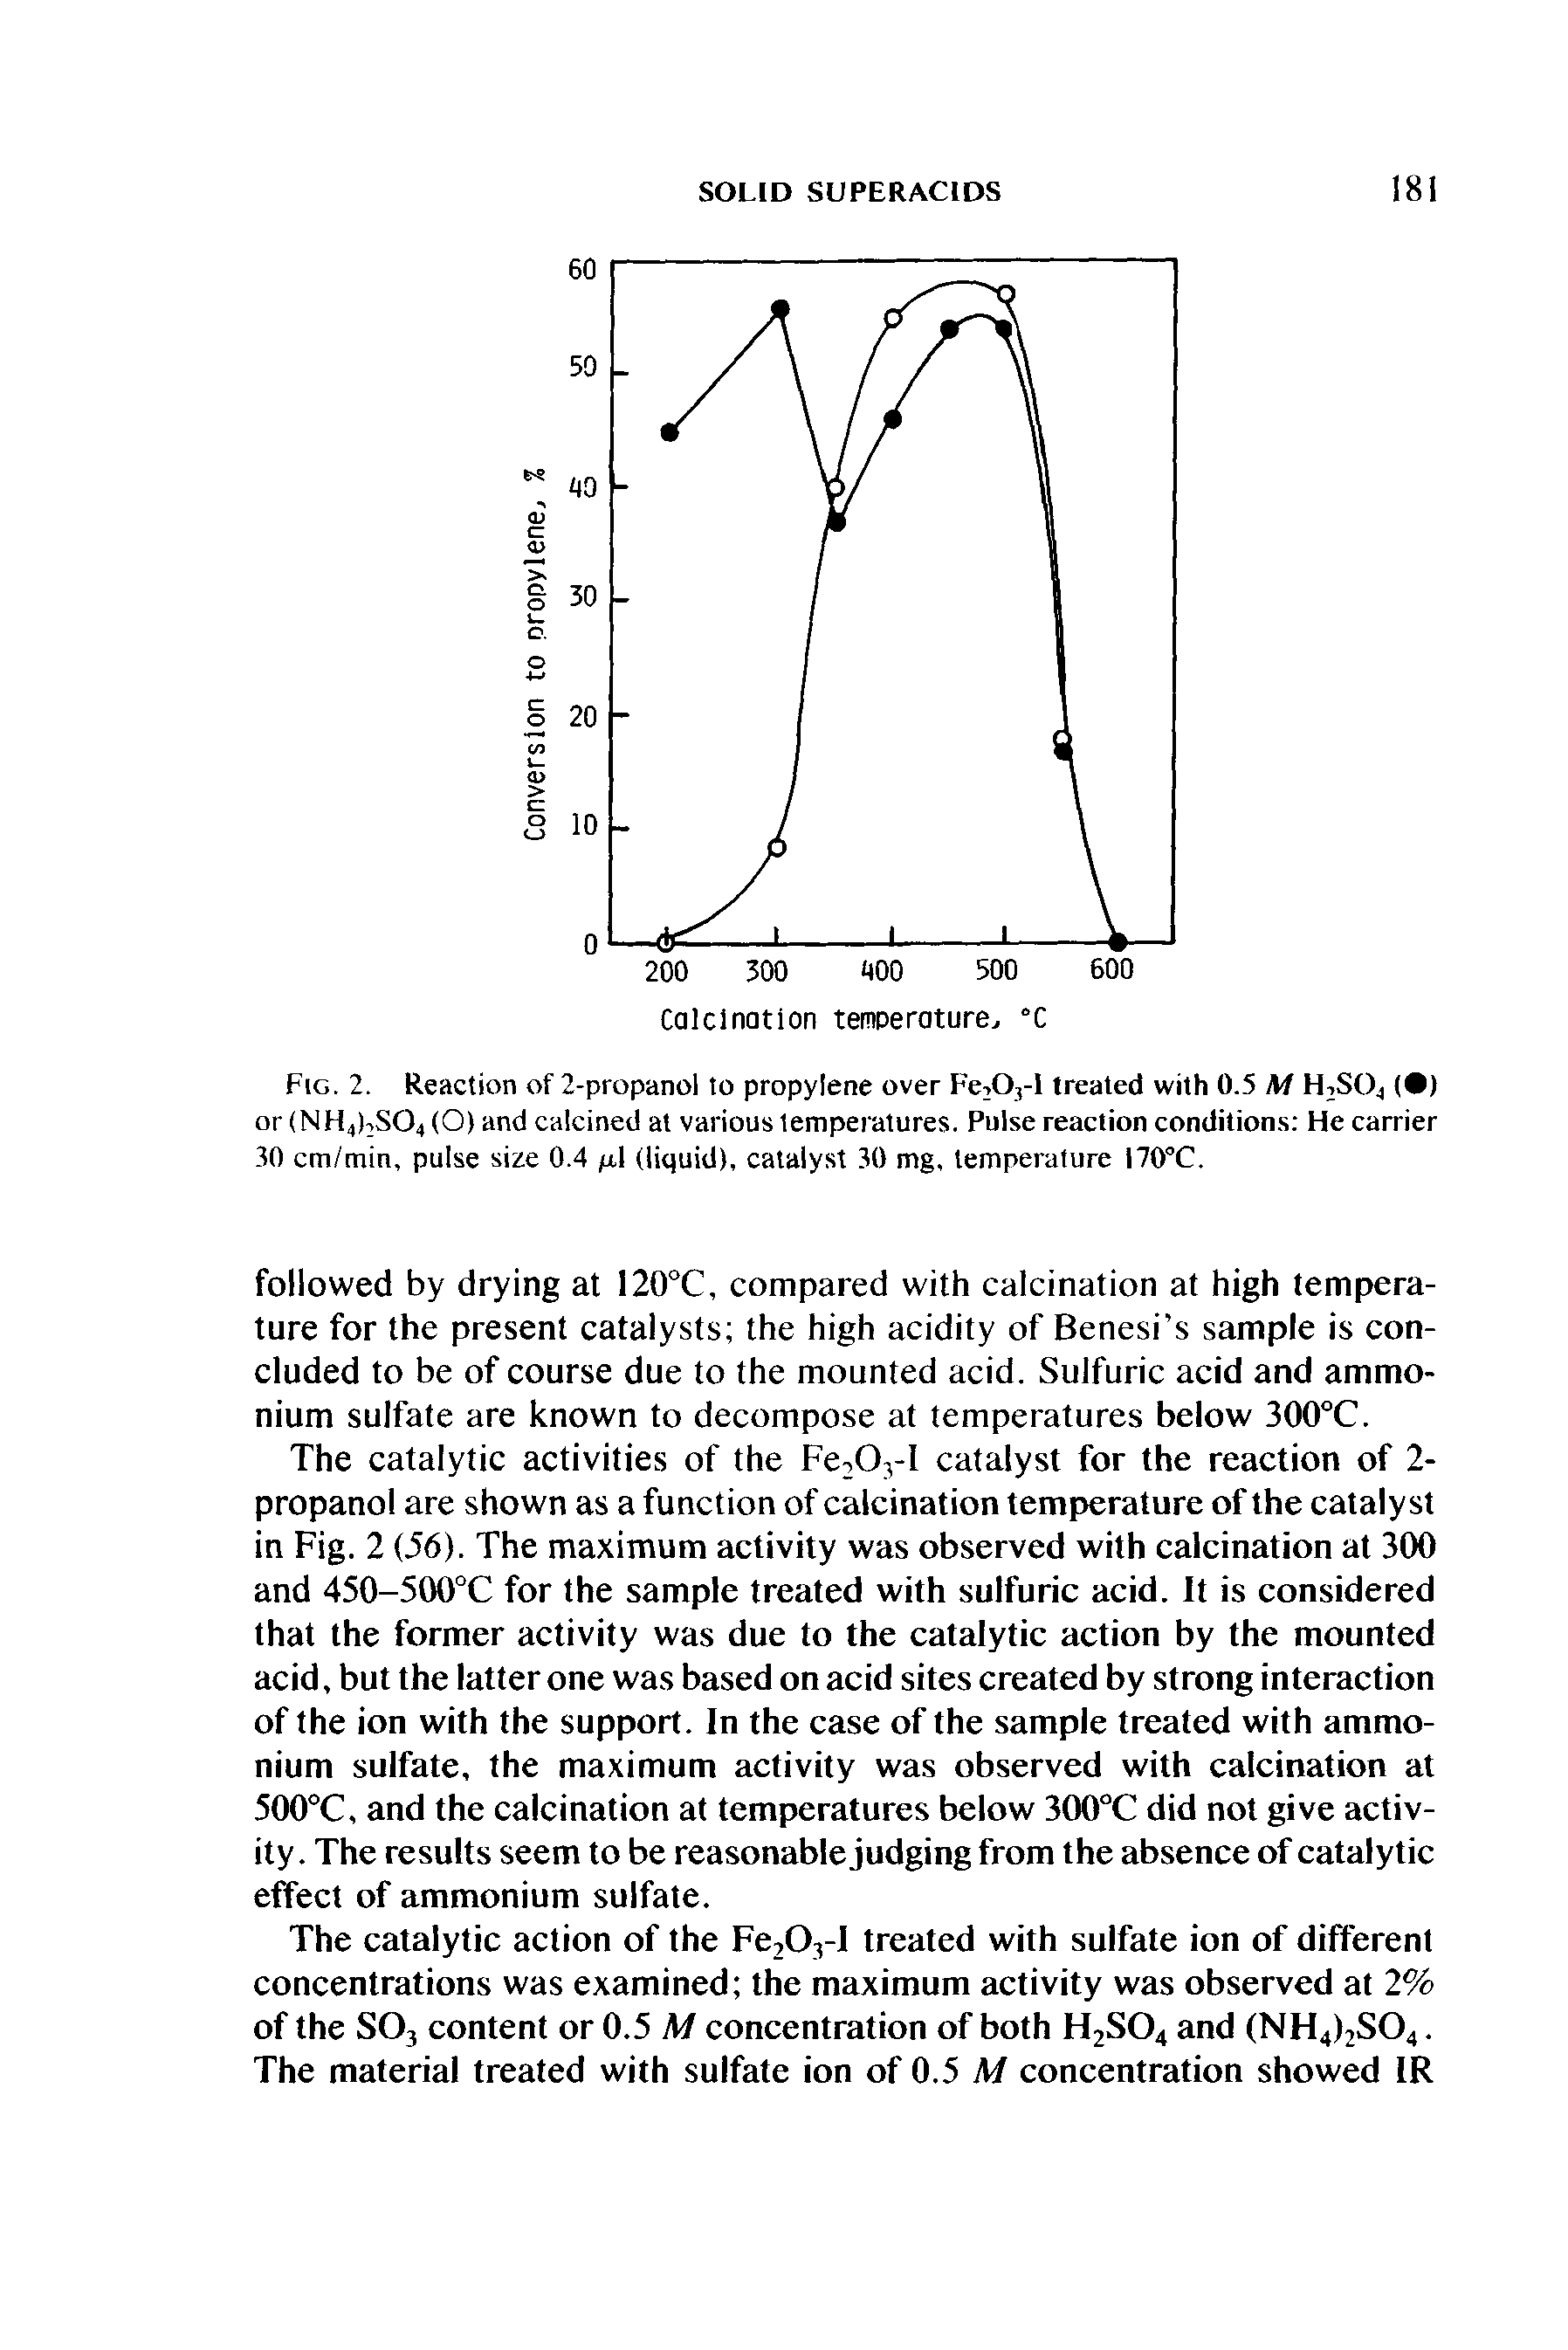 Fig. 2. Reaction of 2-propanol to propylene over Fe 03-1 treated with 0.5 M HiS()4 ( ) or (NH4LSO4 (O) and calcined at various temperatures. Pulse reaction conditions He carrier 30 cm/min, pulse size 0.4 p.1 (liquid), catalyst 30 mg, temperature 170°C.